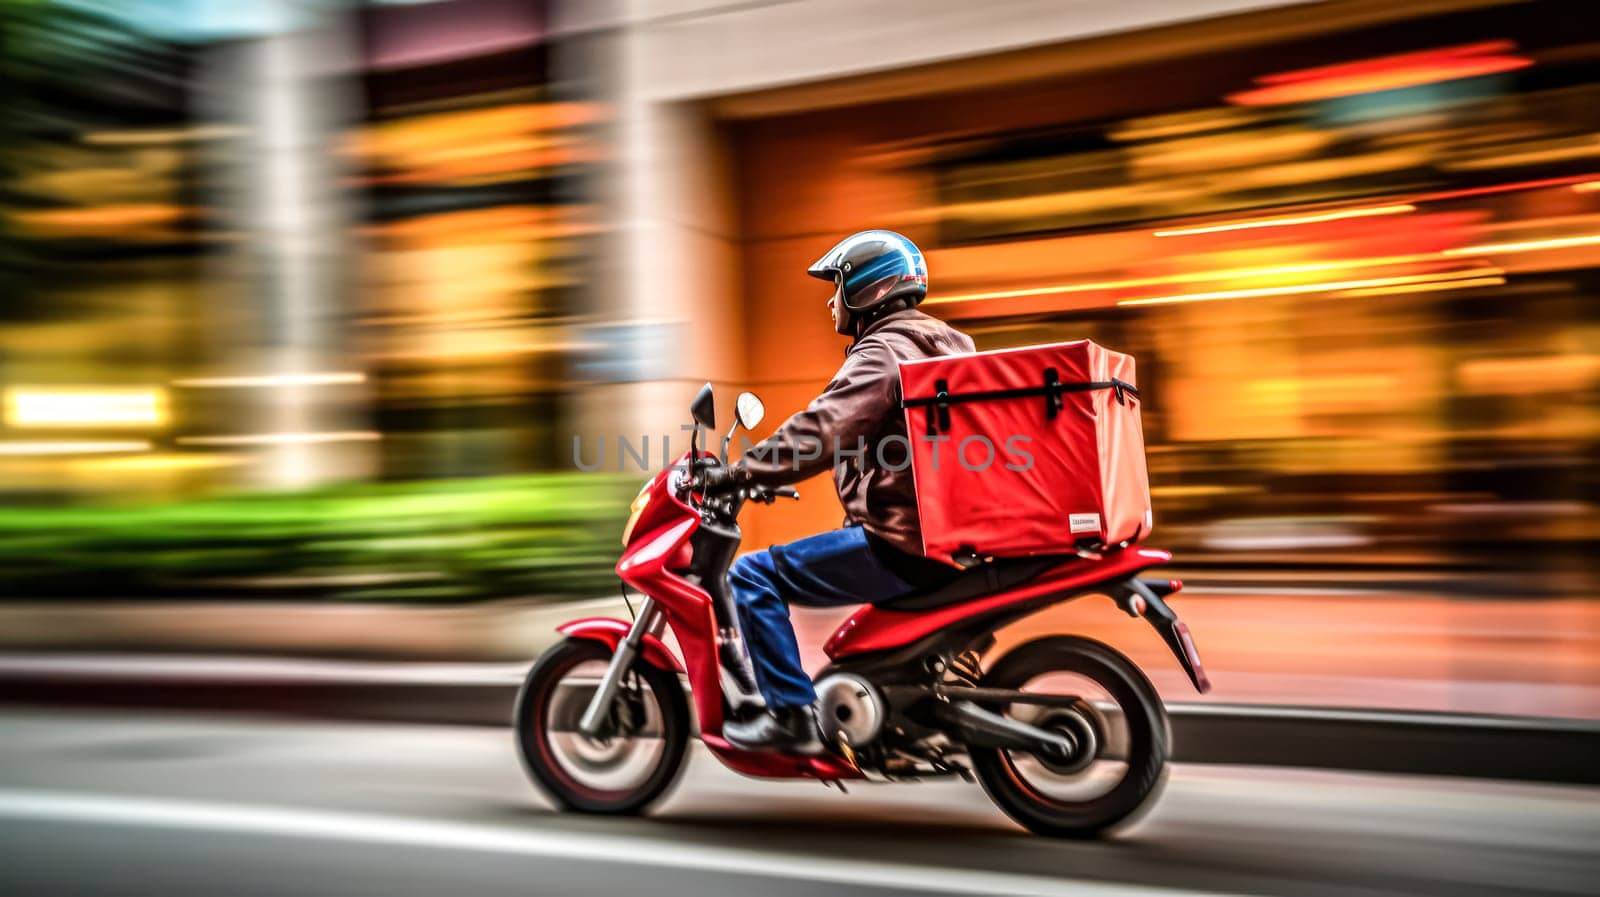 Motion blurred shot of a dedicated food delivery man riding a moped to deliver an order. Standard image capturing the speed and efficiency of food delivery services.